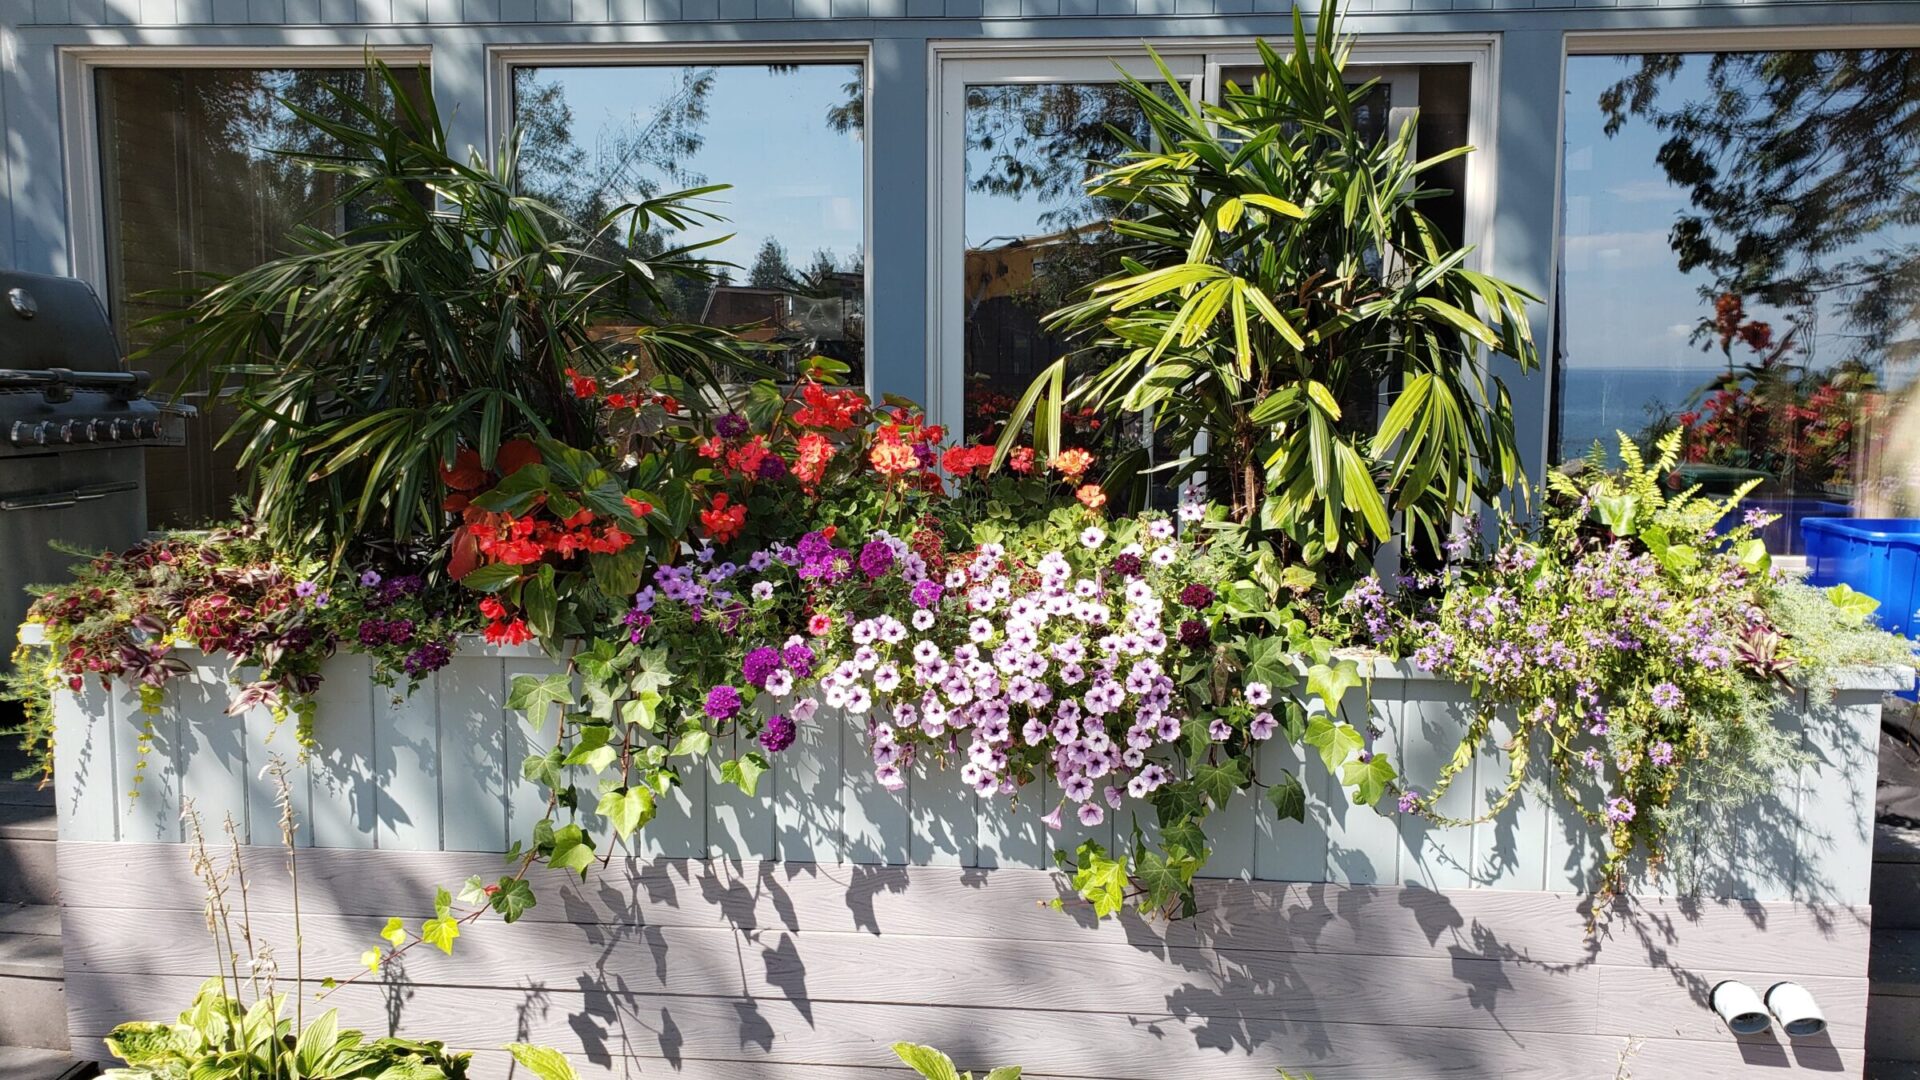 The image shows a vibrant floral display in a wooden planter against a house with a barbecue grill and blue recycling bins nearby, overlooking the ocean.